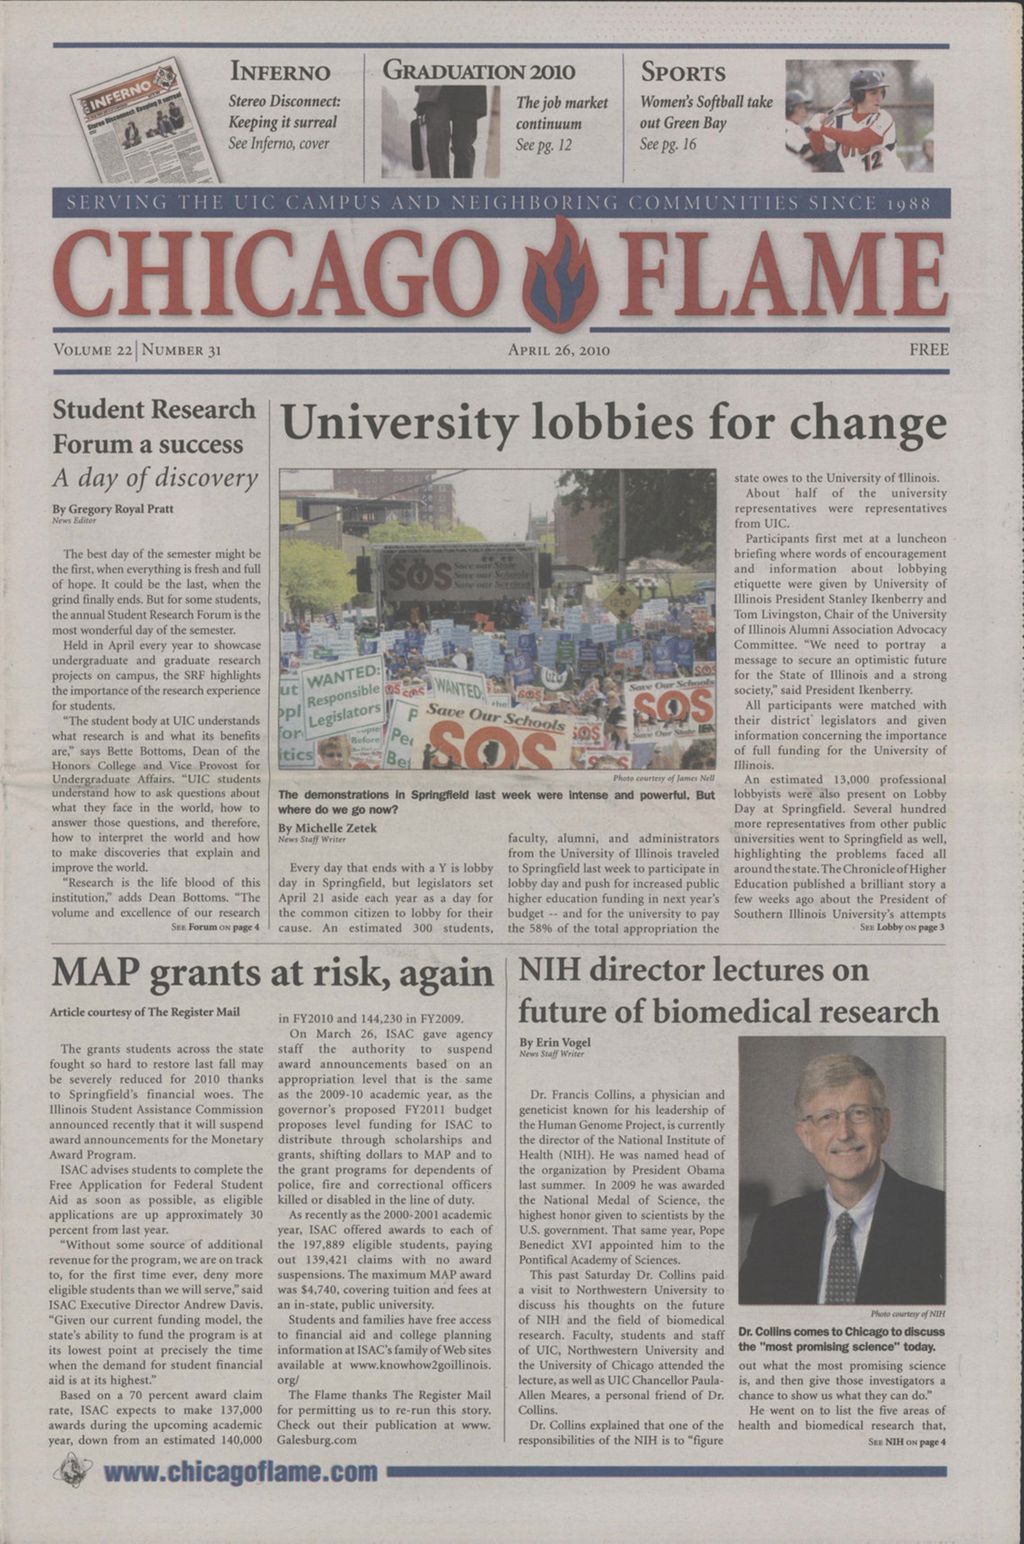 Chicago Flame (April 26, 2010)